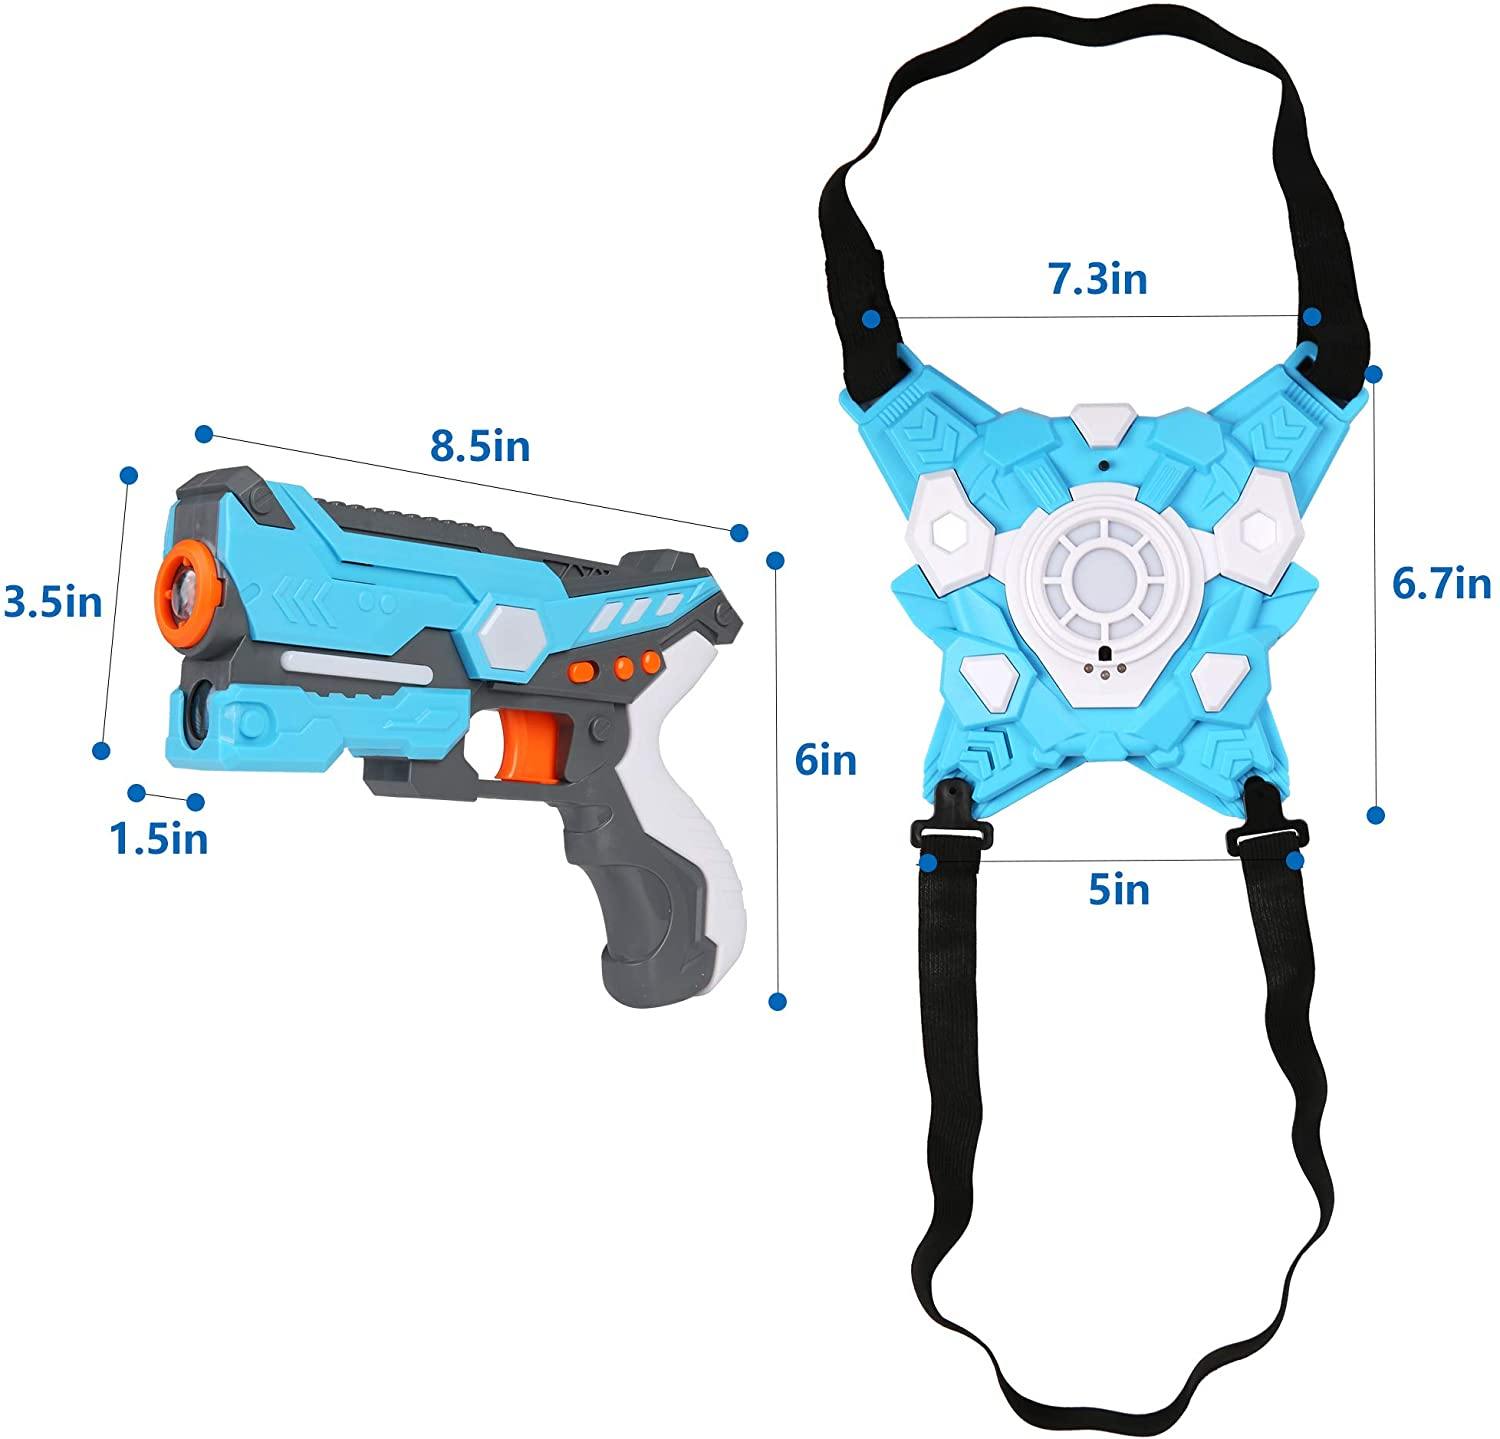 Kids Toys Gun with Vest for Boys Girls Target Shooting Game Toy, Indoor Outdoor Practice Aiming for 1-Player +, Blue - Bosonshop